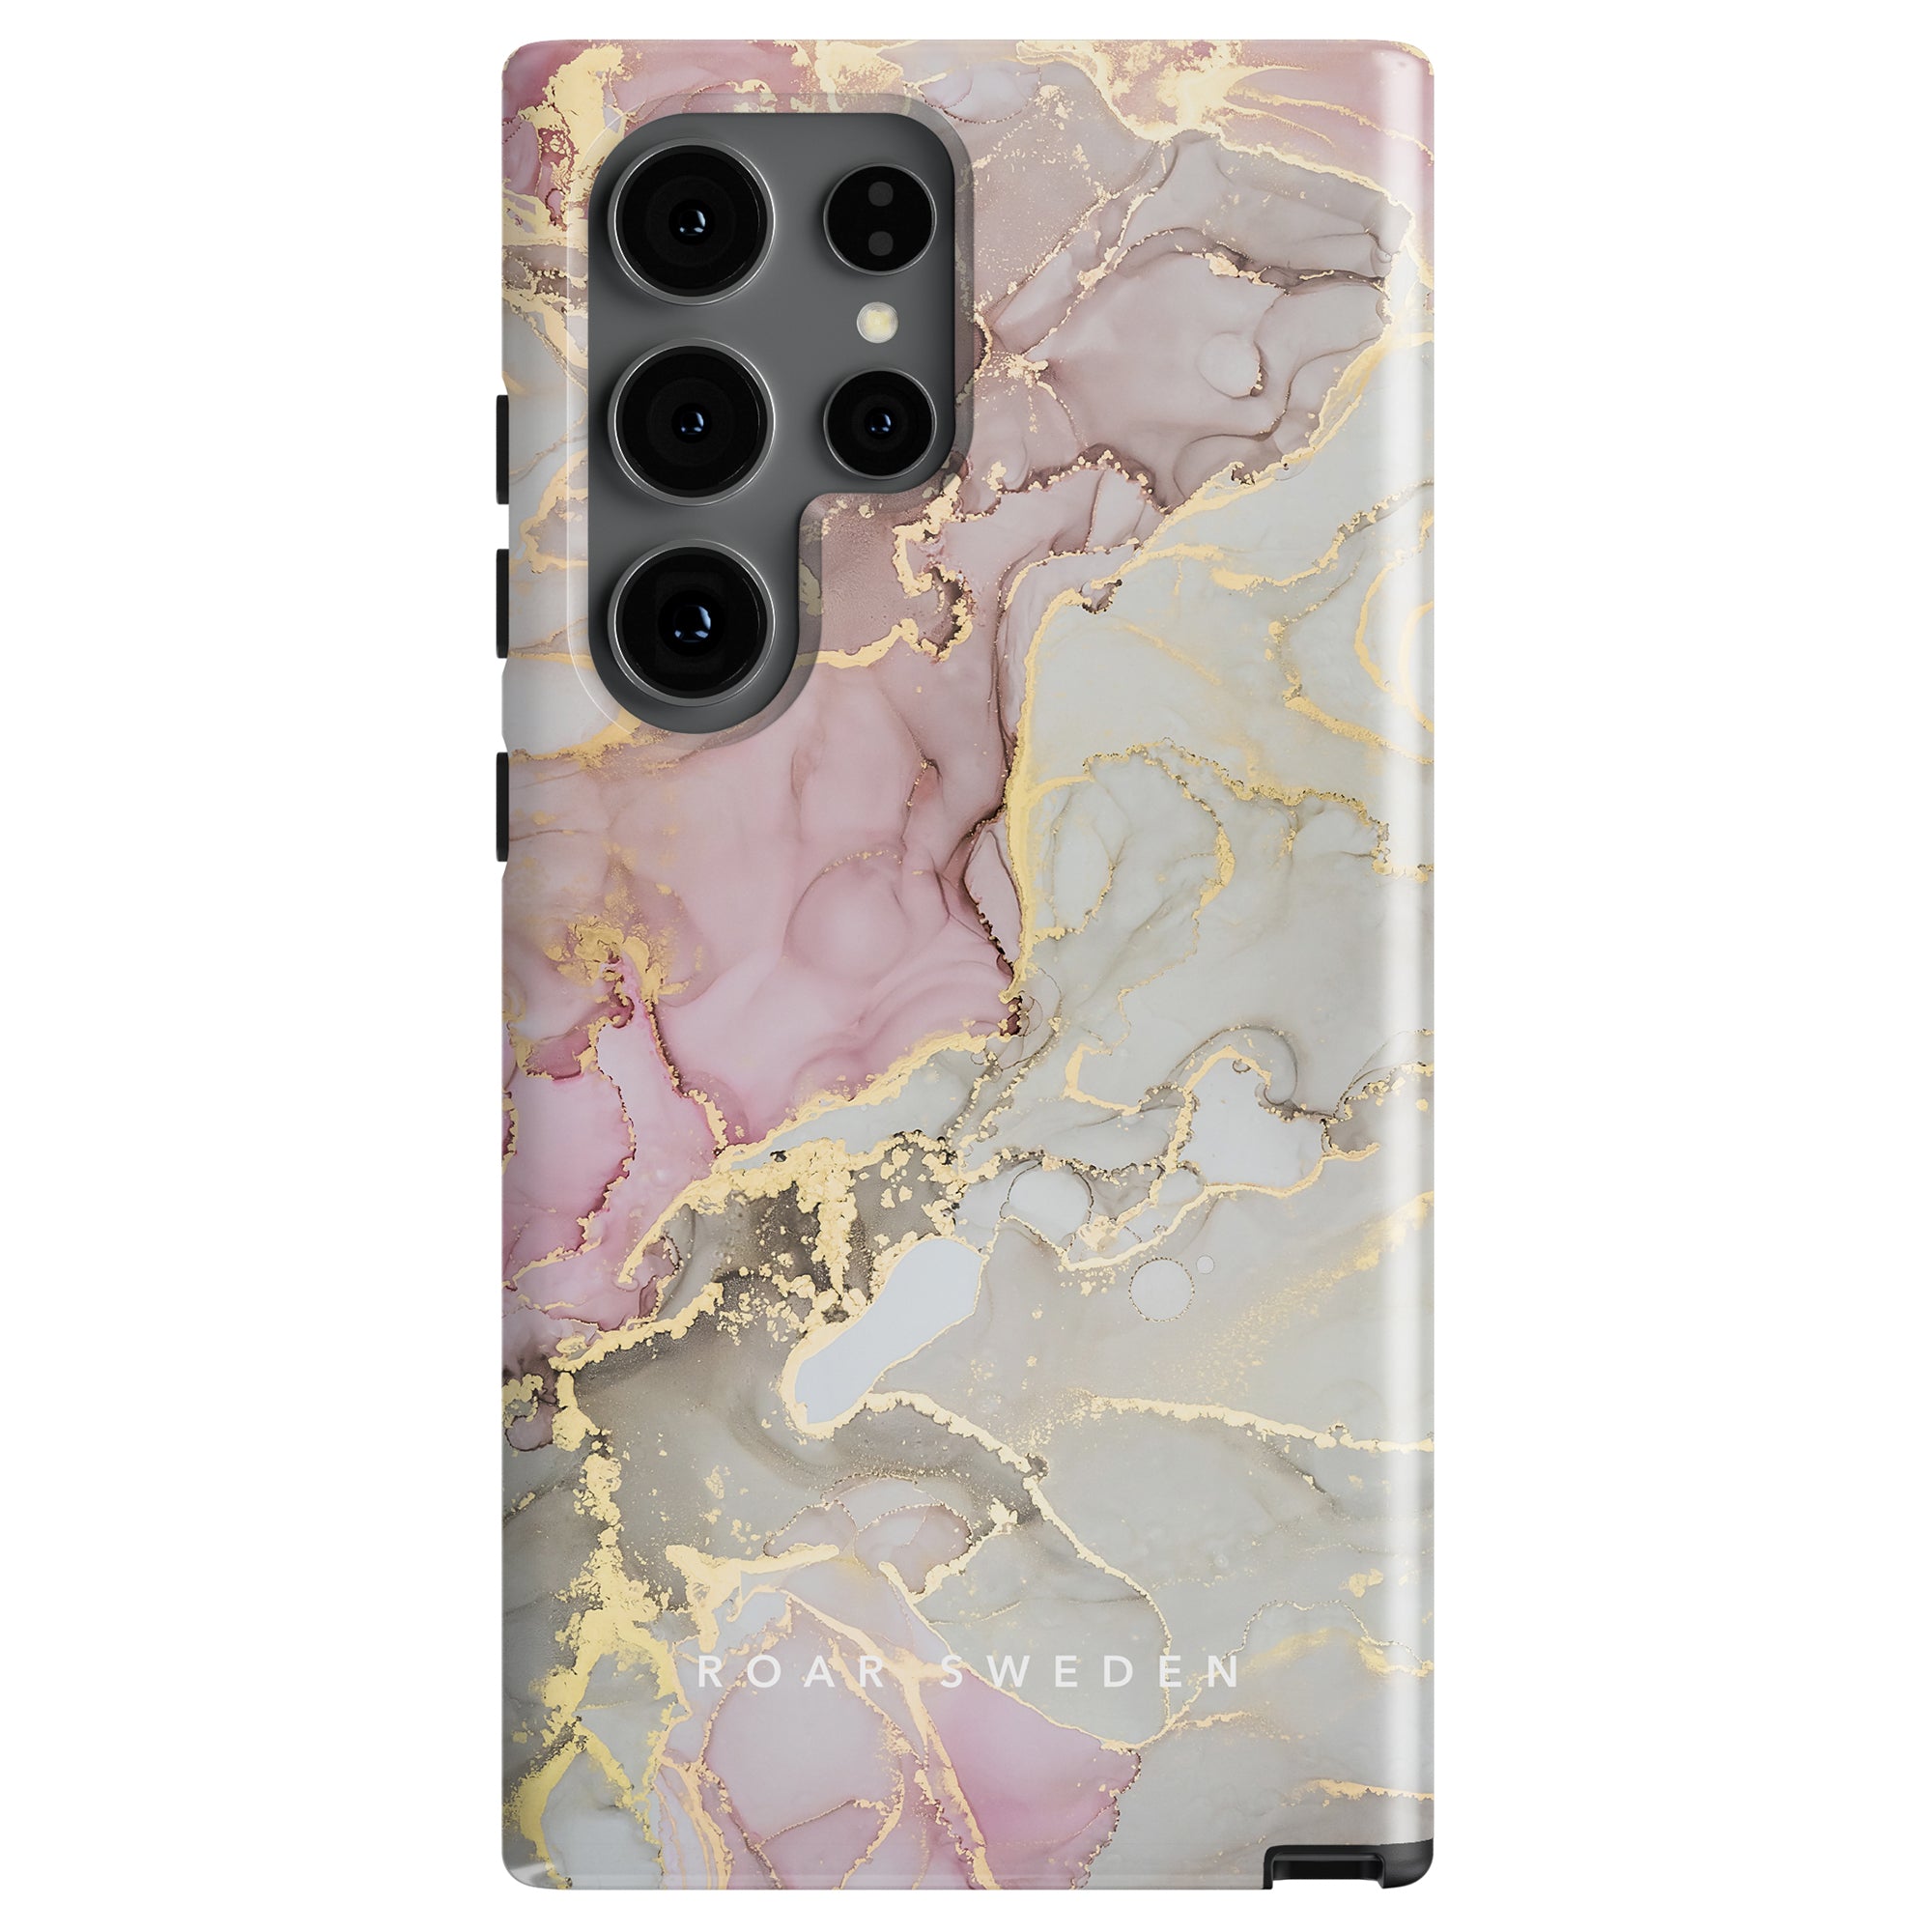 A smartphone with a pink and grey marble-patterned Glitter - Tough case featuring gold accents, with the brand name "ROAR SWEDEN" visible at the bottom. Four rear camera lenses are prominently shown on the top left, perfectly fitting both Samsung and iPhone models.